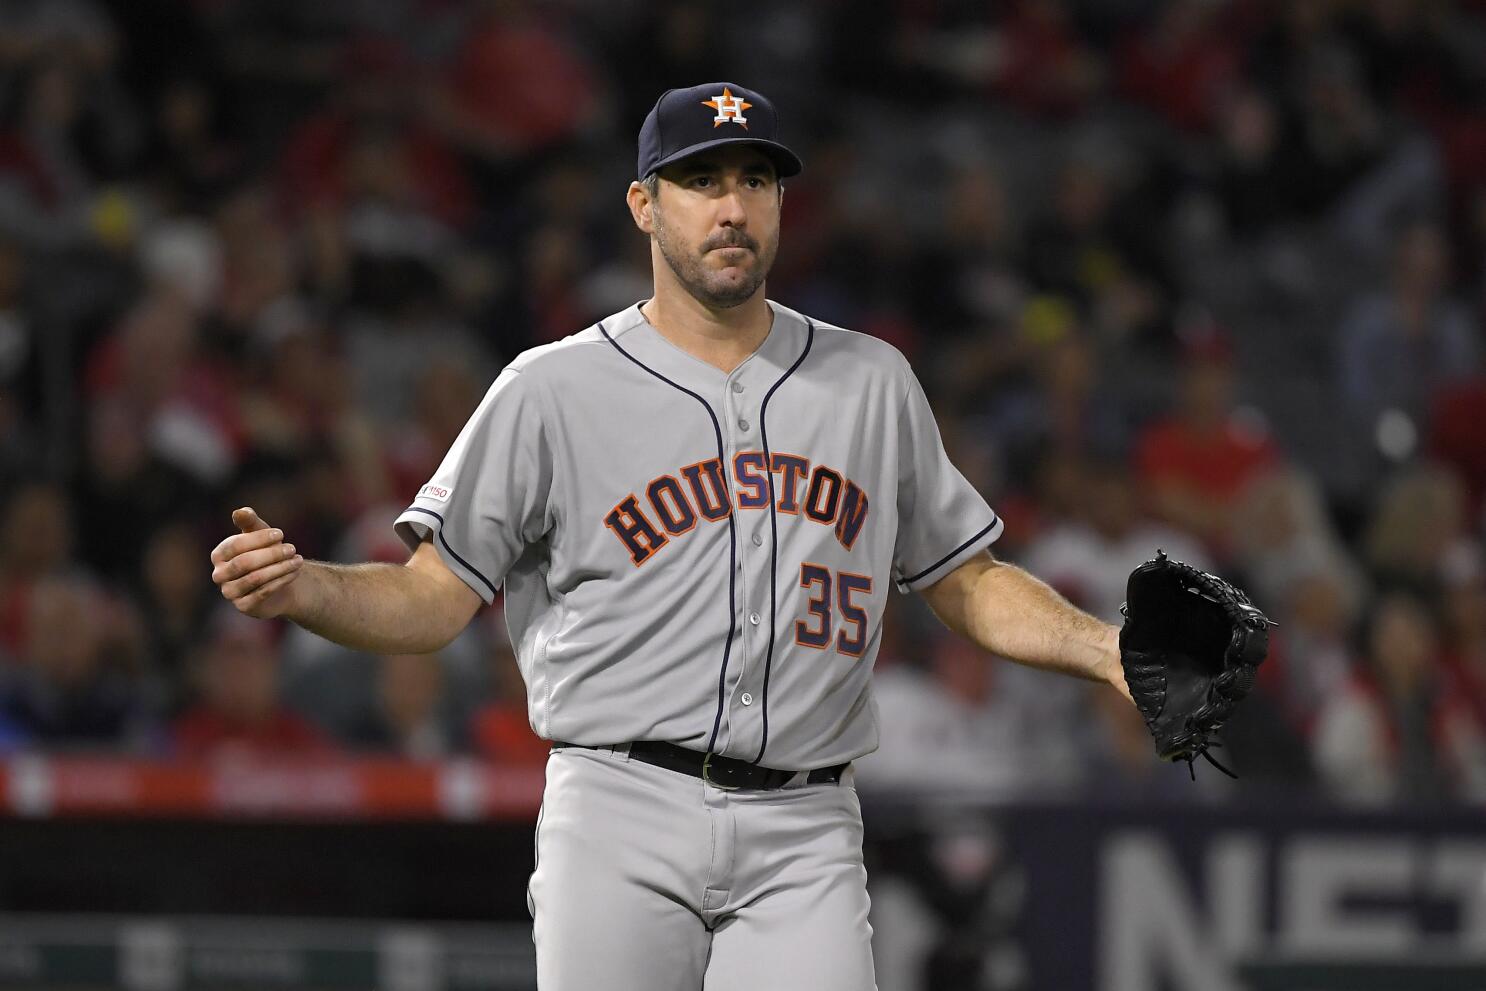 Former Astro Ausmus signs deal with Dodgers